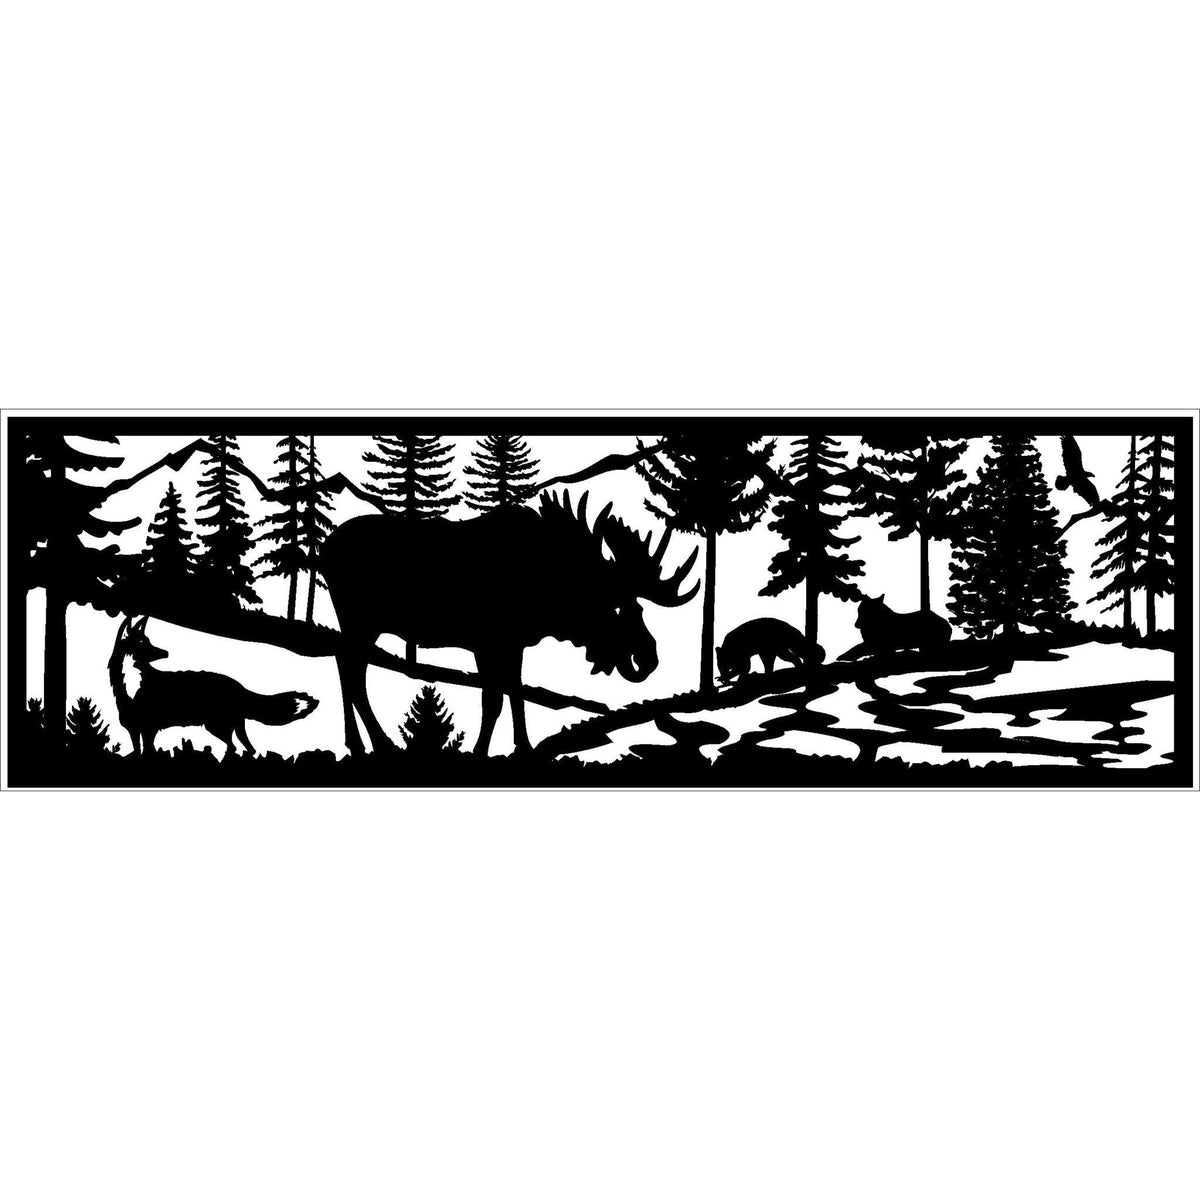 Fox Moose River Mountains Hunting Metal Balcony / Staircase Panels